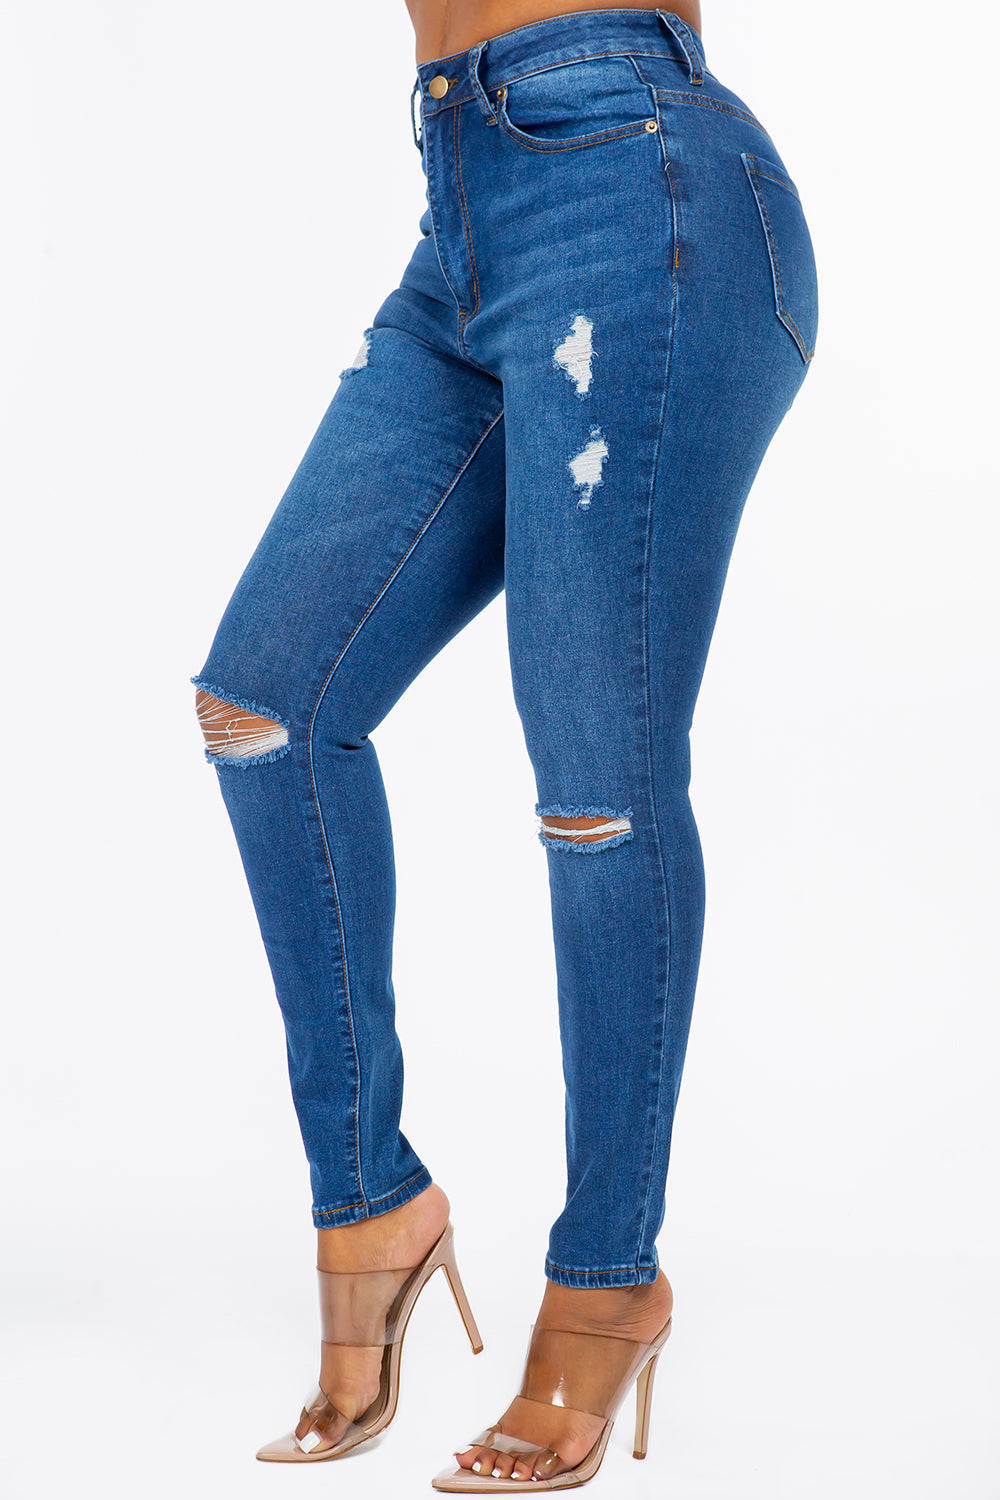 Extreme Stretch Distressed High Rise Skinny Jeans Dark YH2212